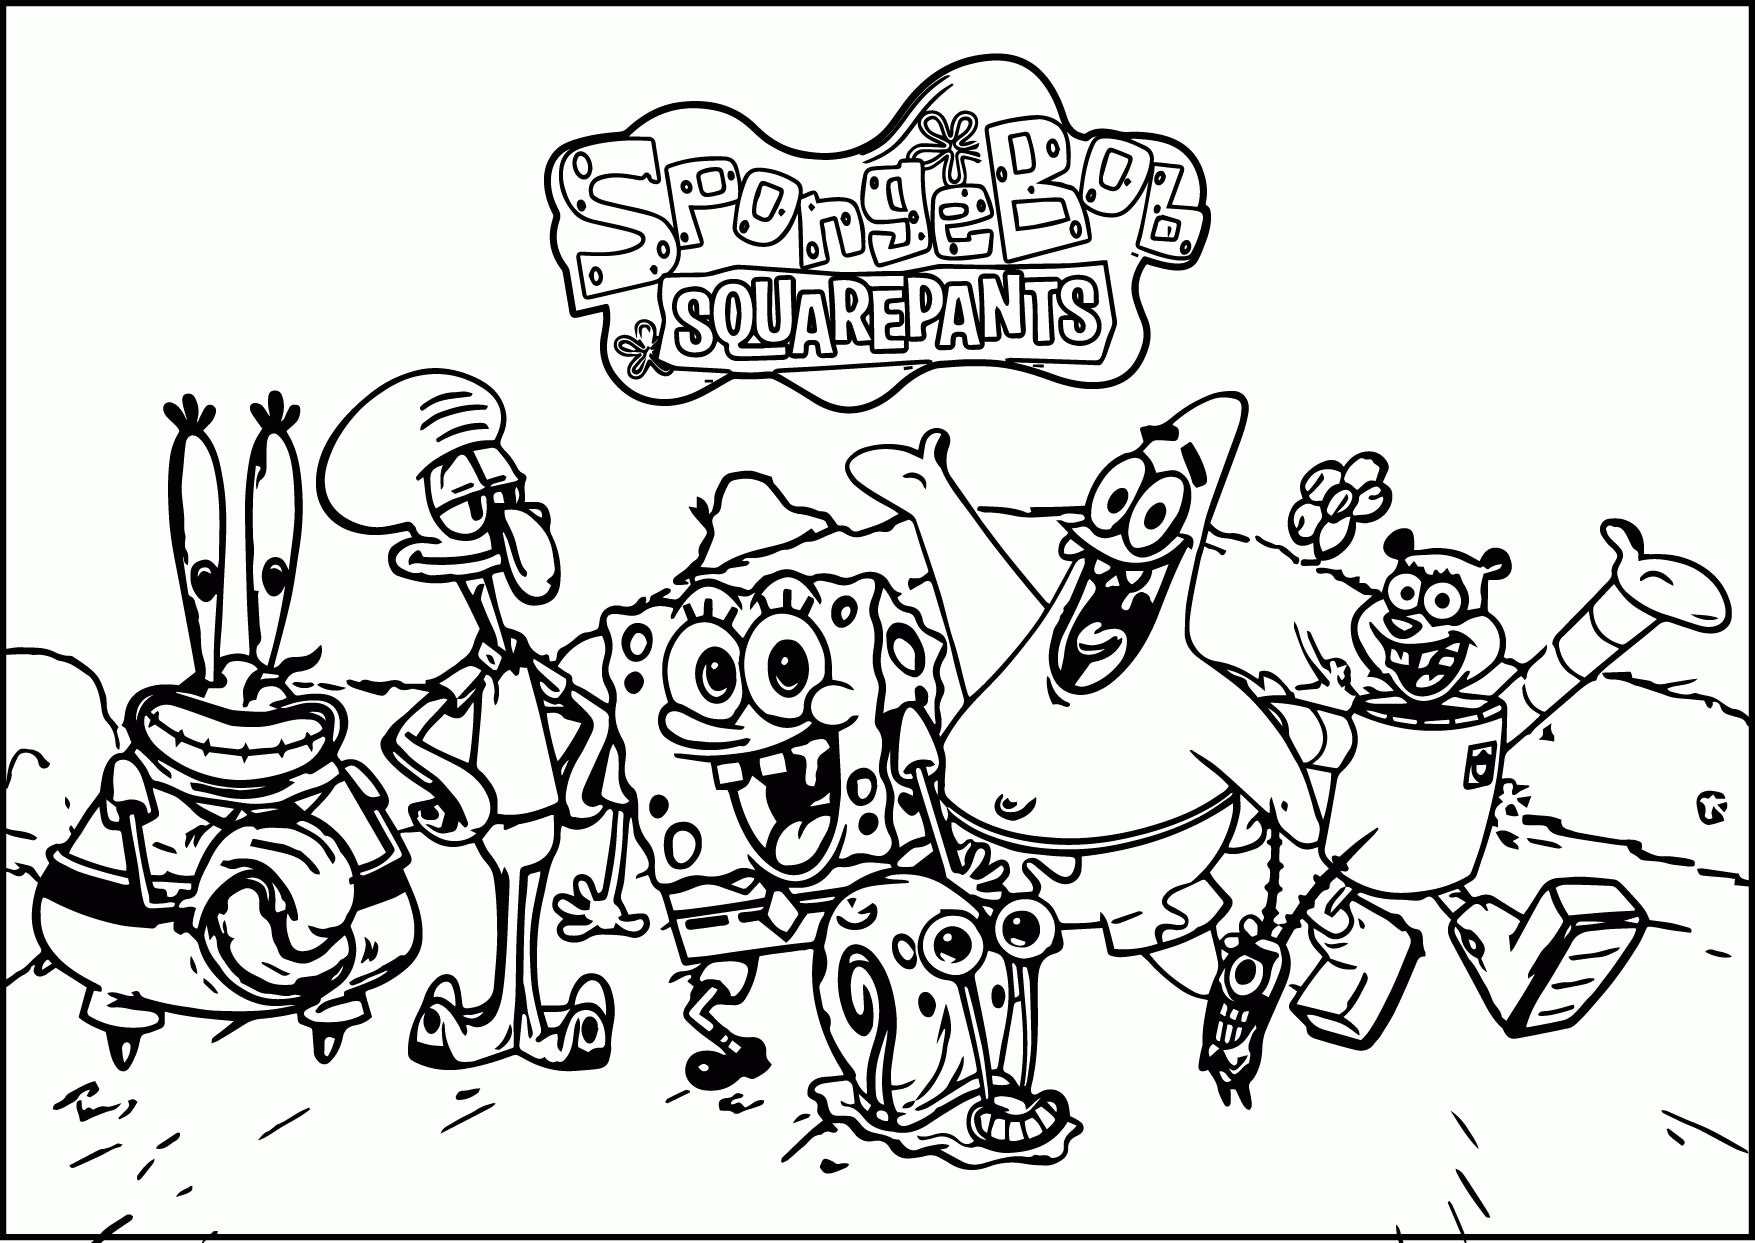 Spongebob Characters 51 Cool Coloring Page